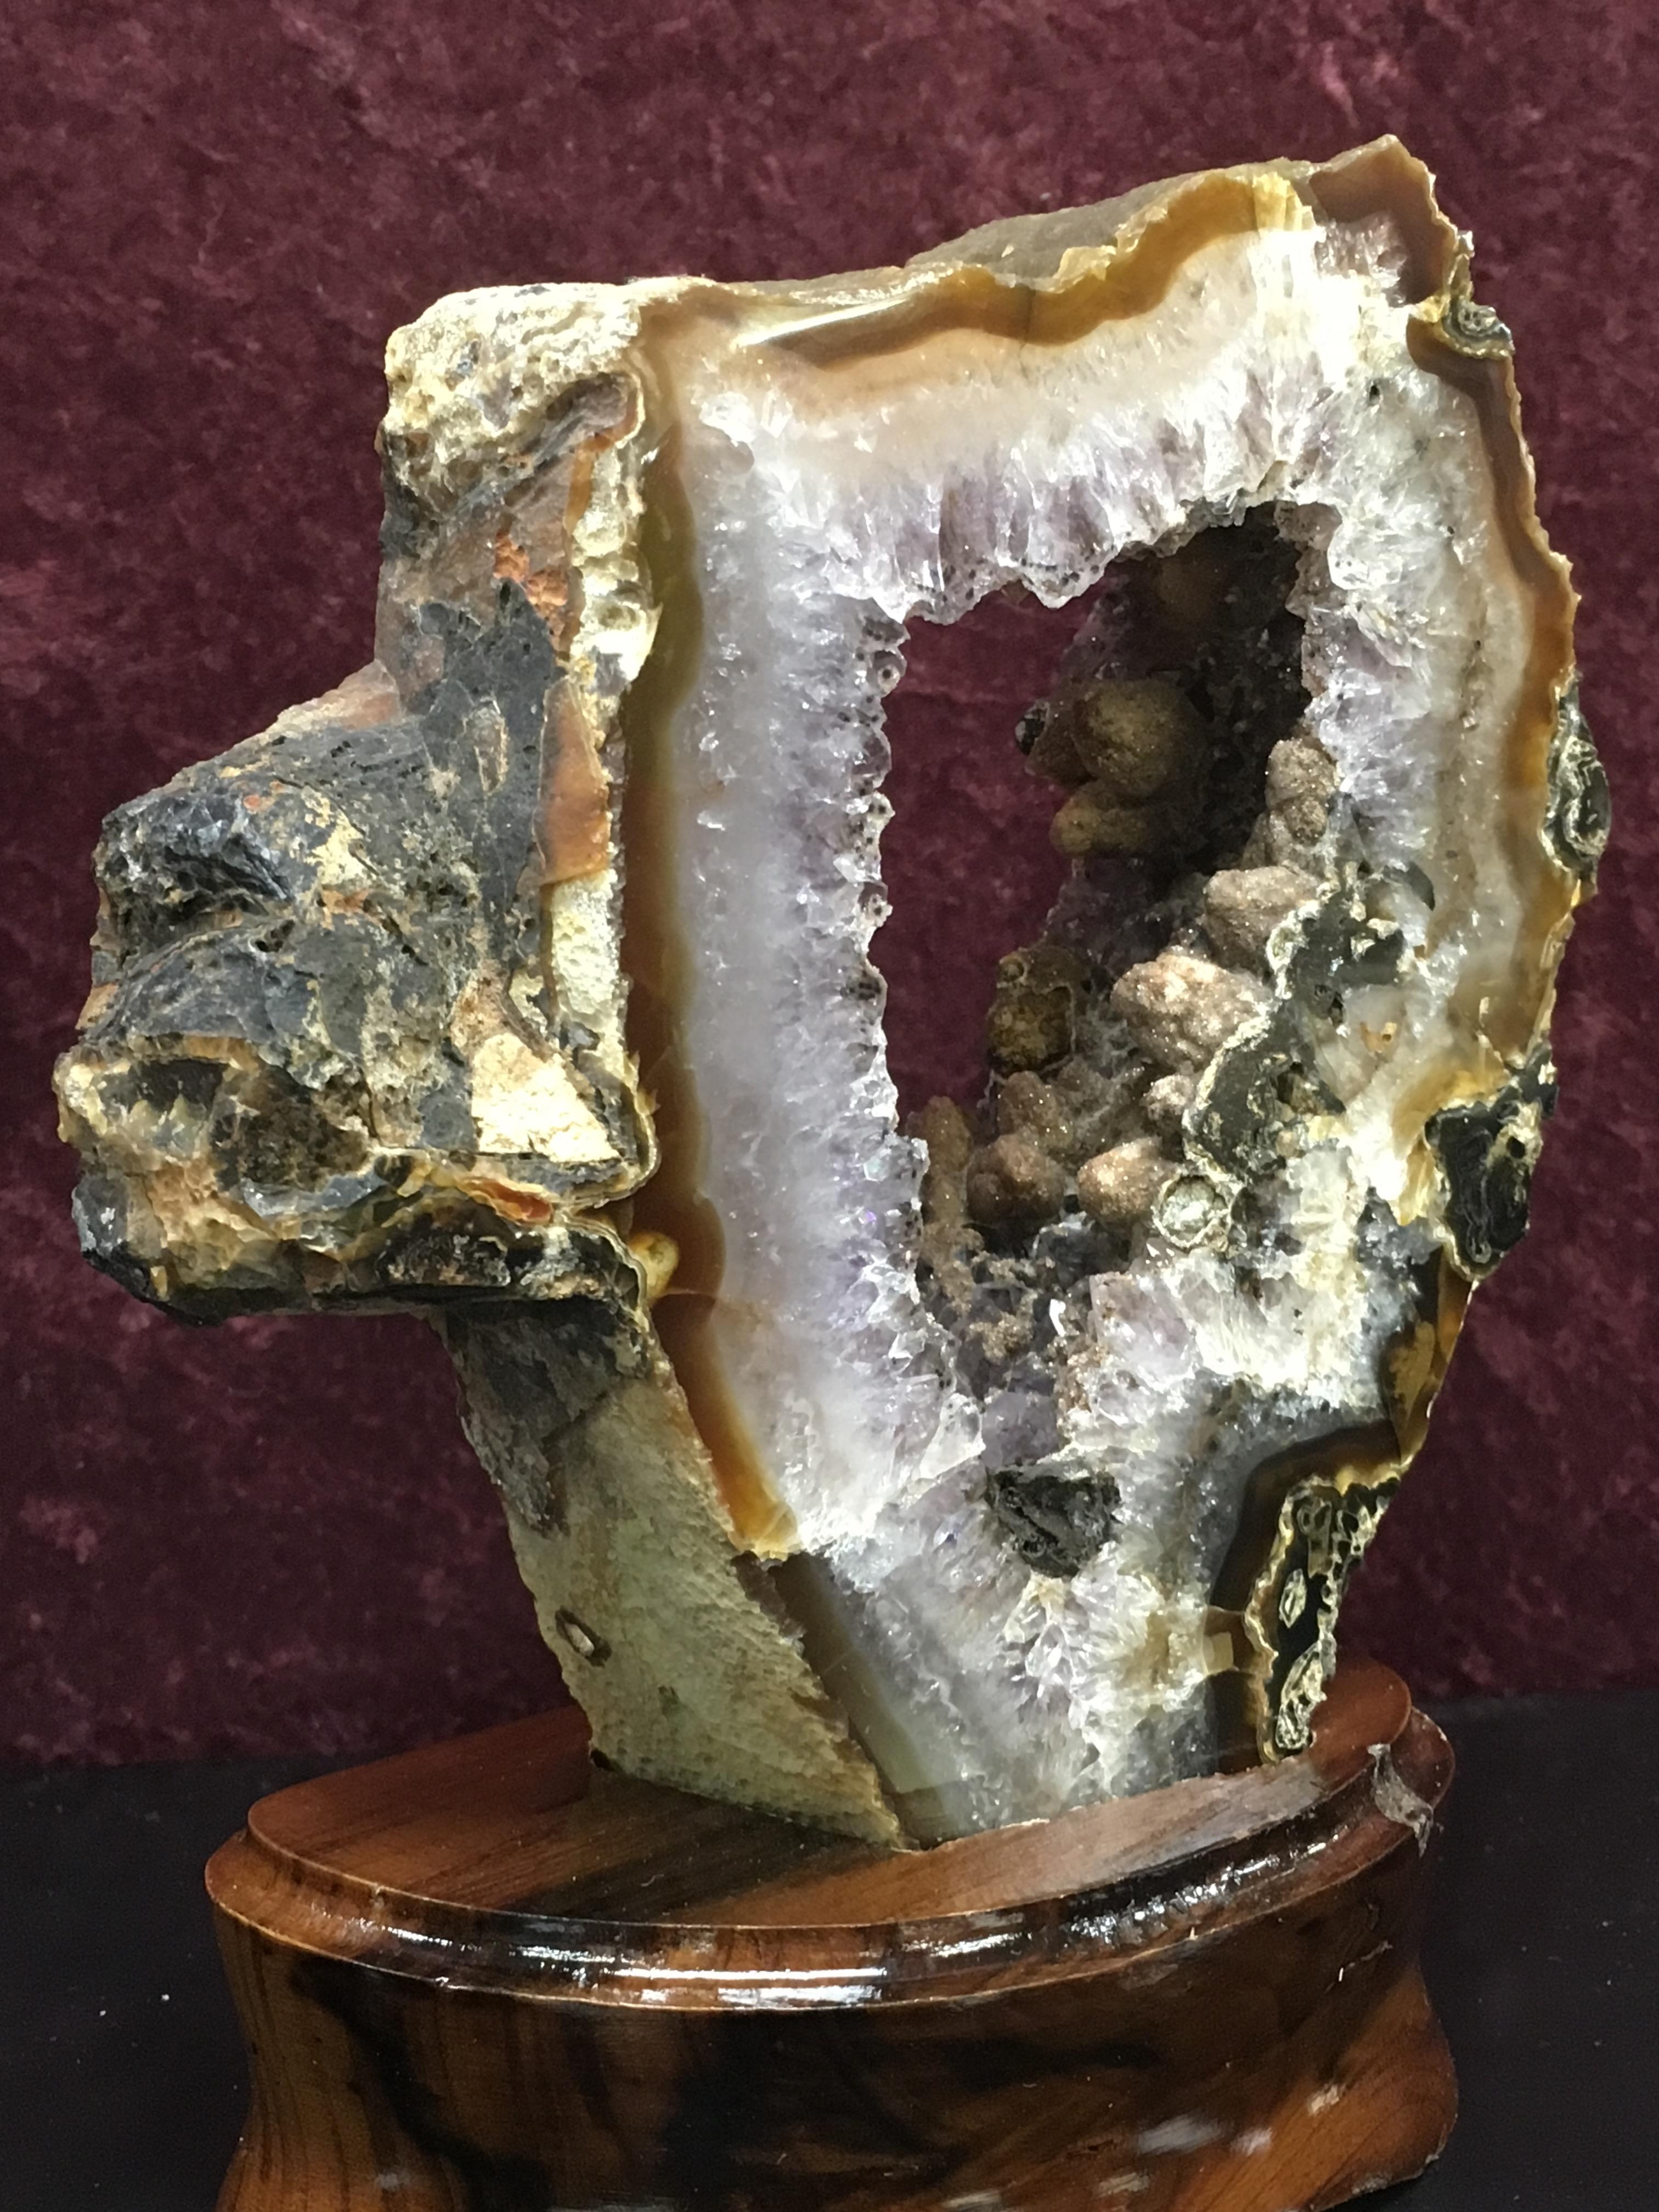 4 MOUNTED AND POLISHED AGATE CRYSTAL FROM BRAZIL - Image 3 of 5